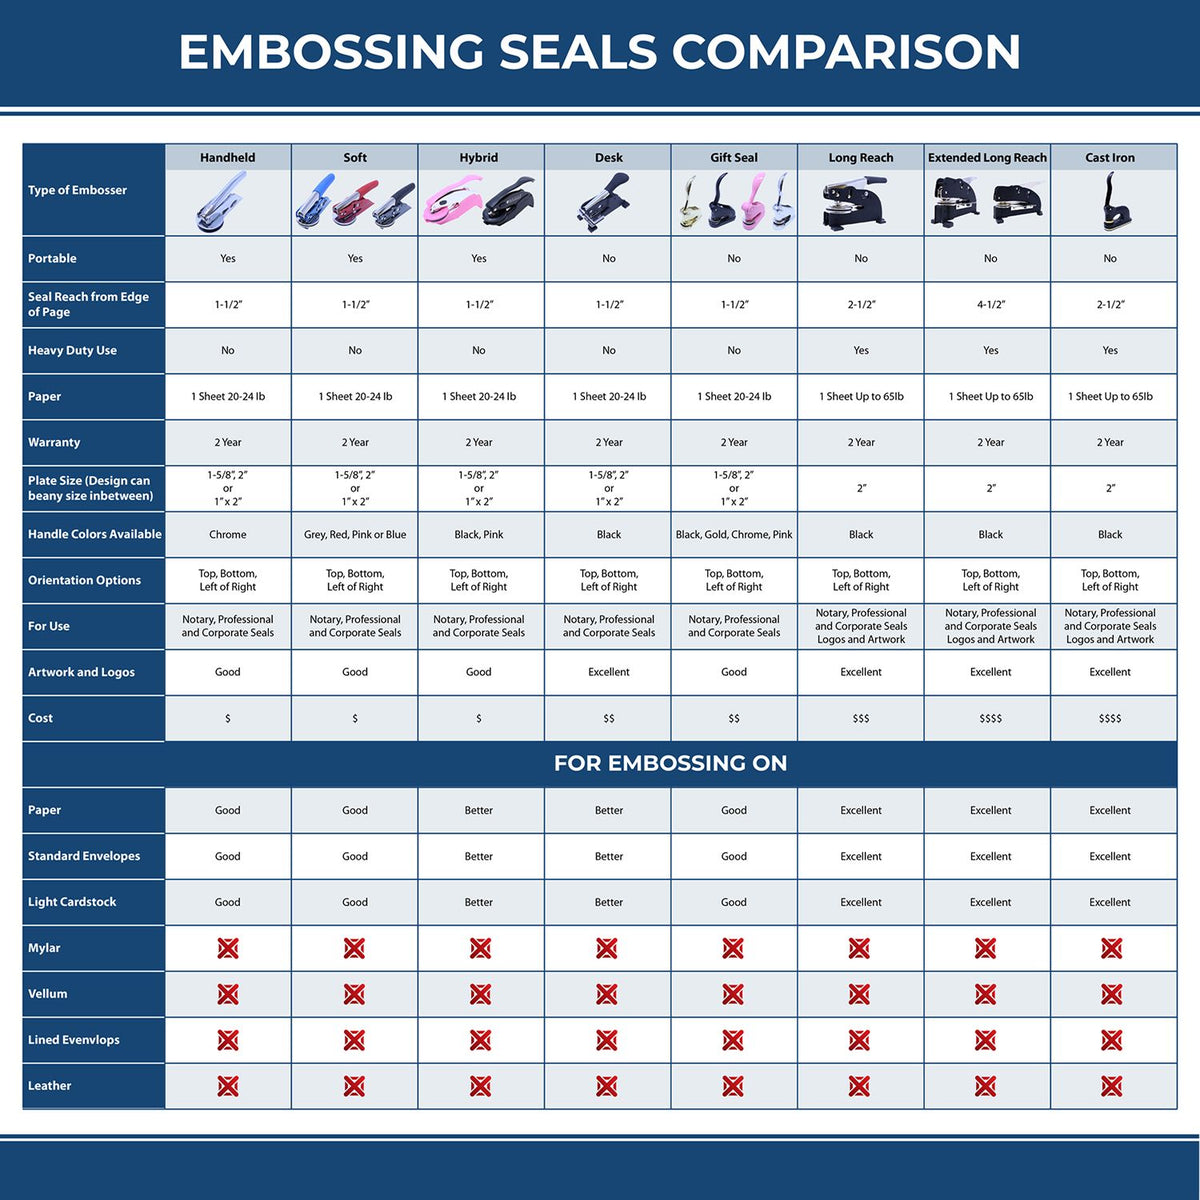 A comparison chart for the different types of mount models available for the State of West Virginia Soft Land Surveyor Embossing Seal.